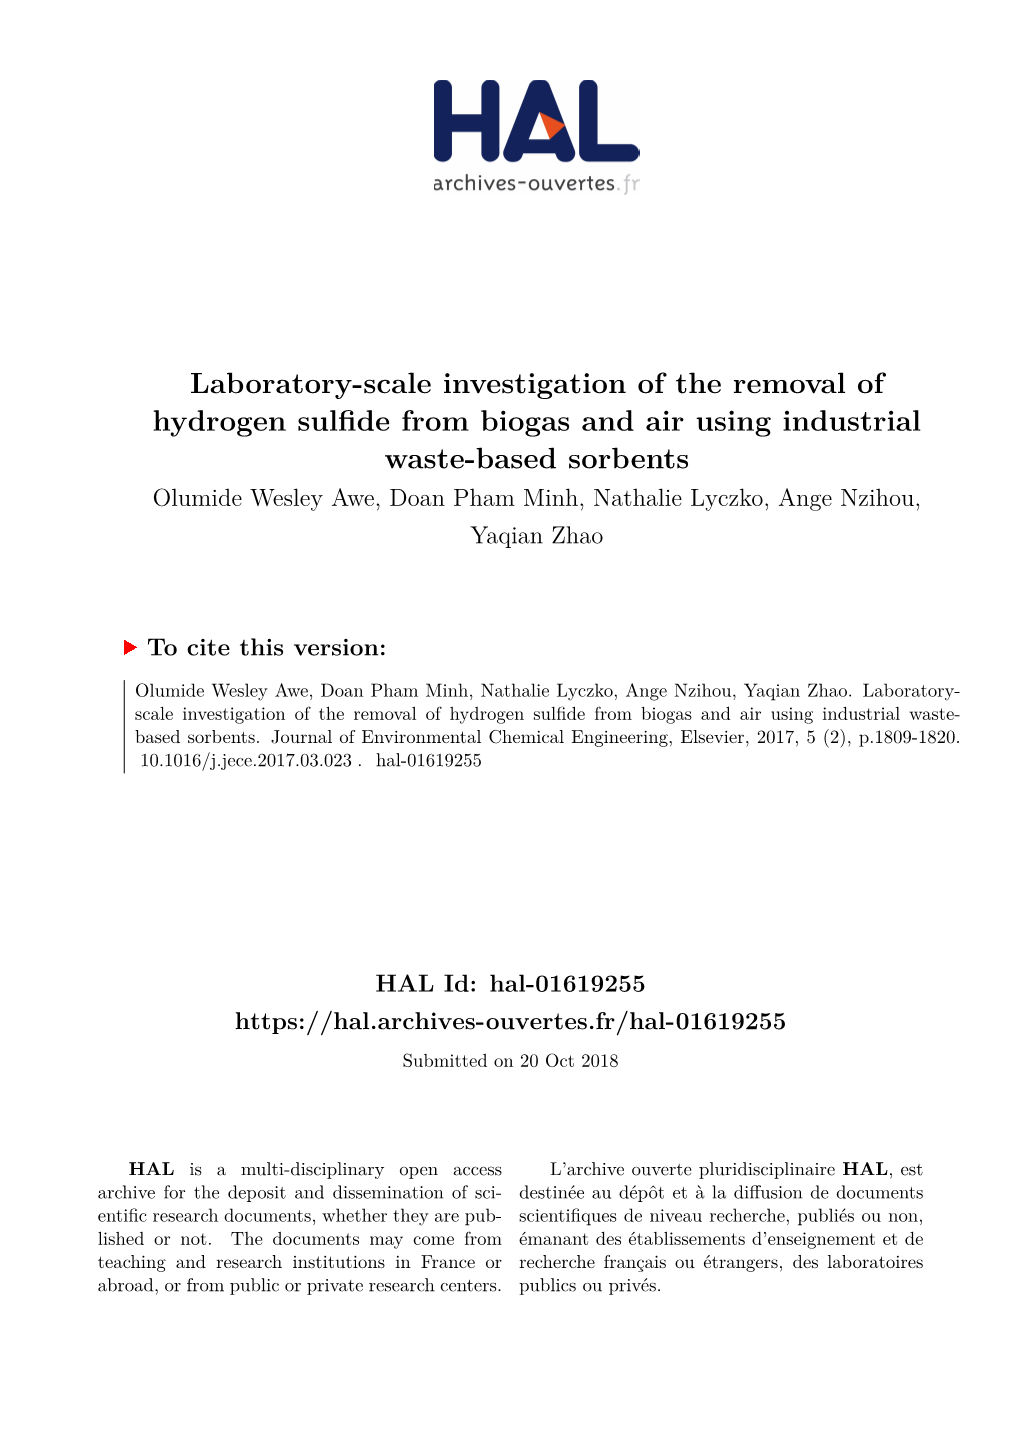 Laboratory-Scale Investigation of the Removal of Hydrogen Sulfide From